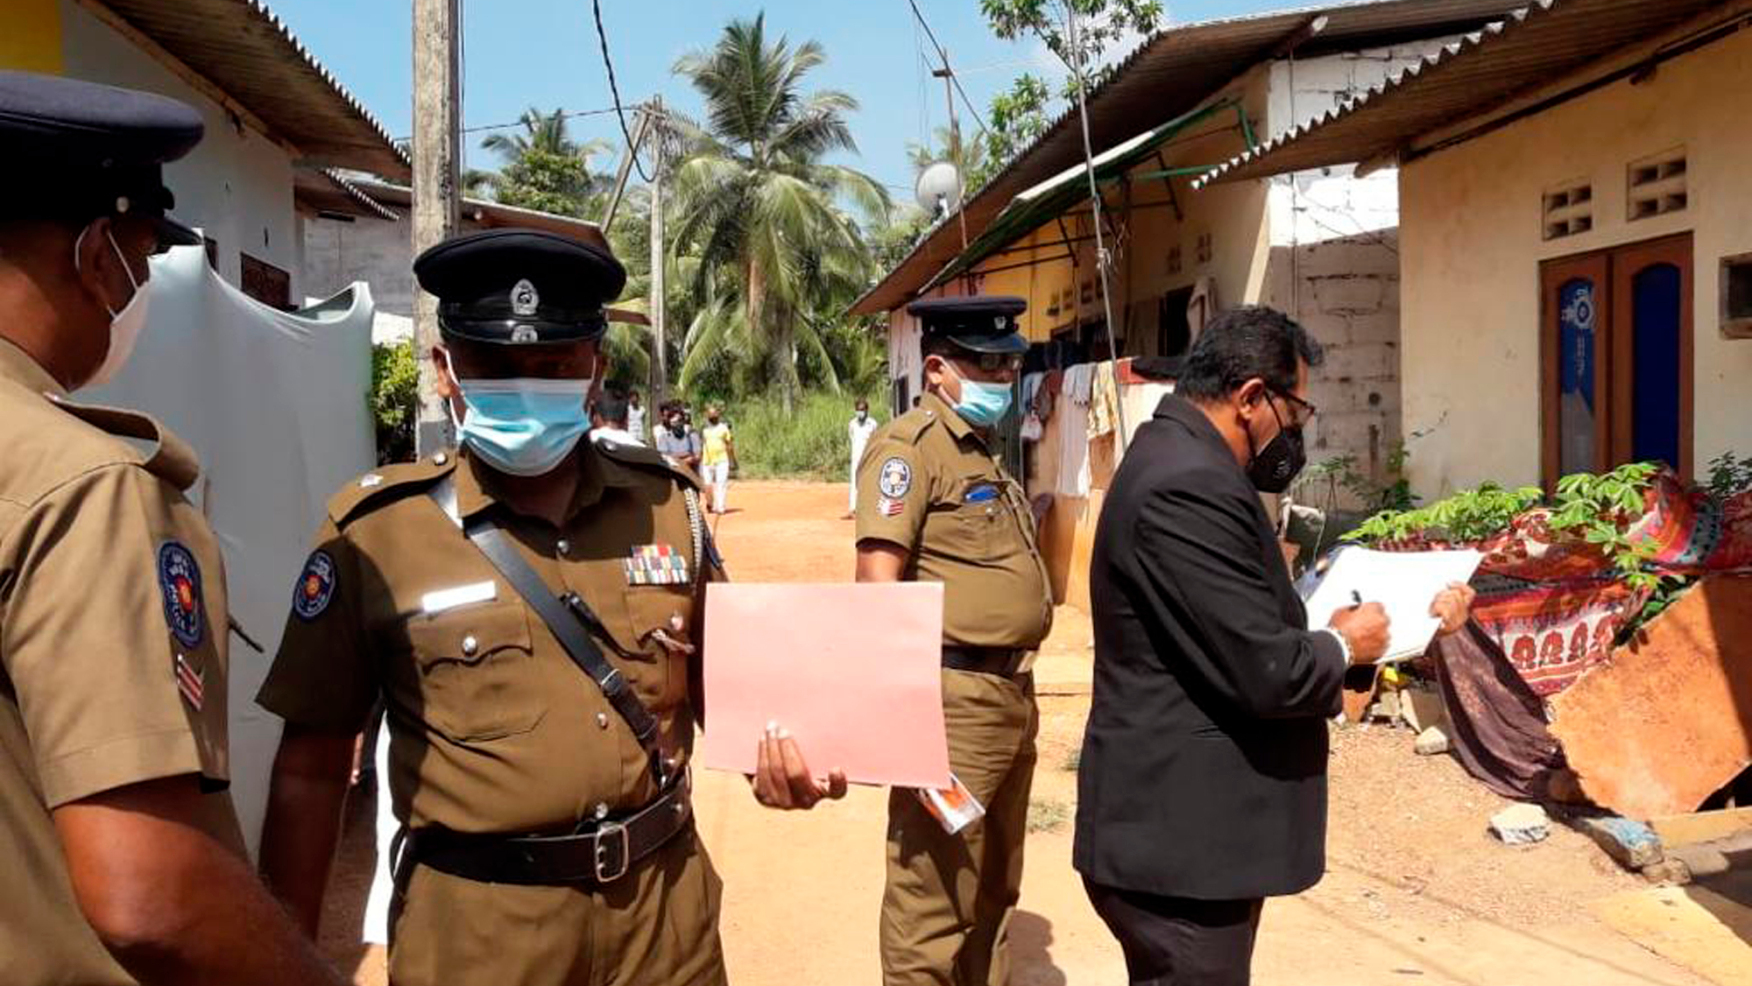 Girl Caned To Death During ‘Exorcism’ Ritual in Sri Lanka